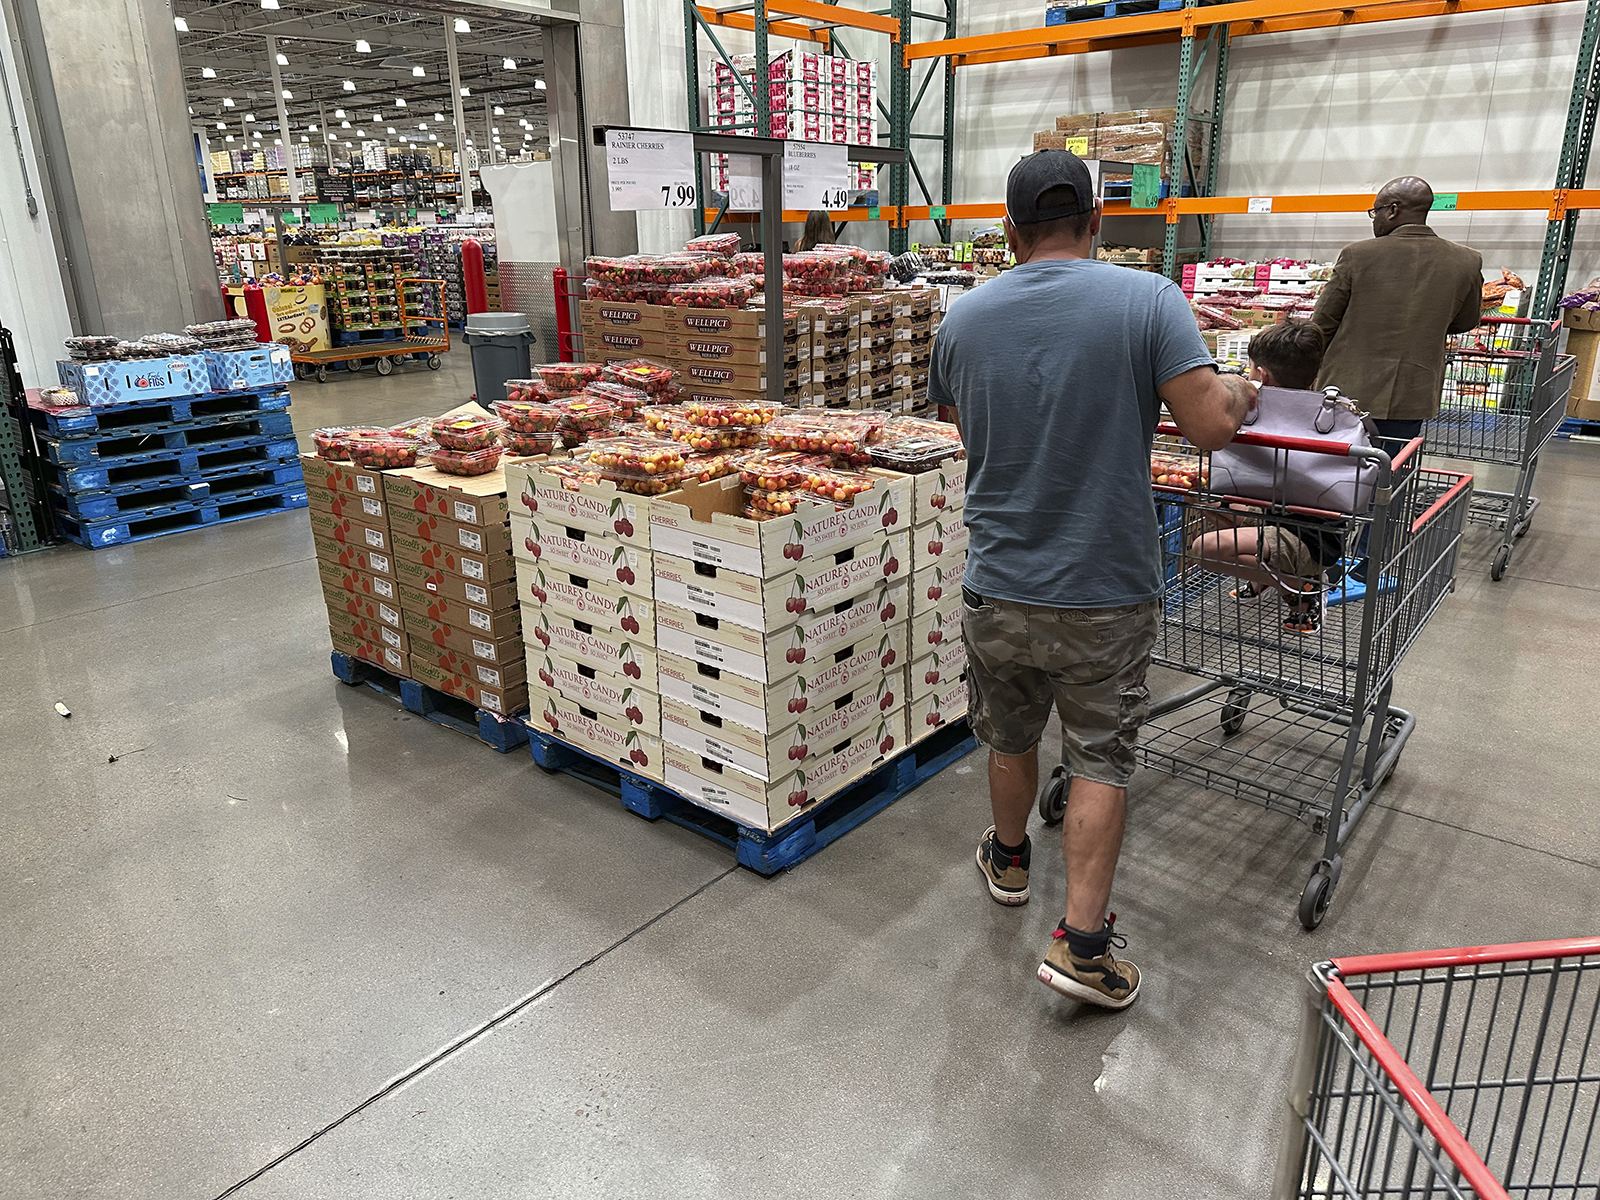 Shoppers peruse product displays through a Costco warehouse on July 11 in Sheridan, CO.